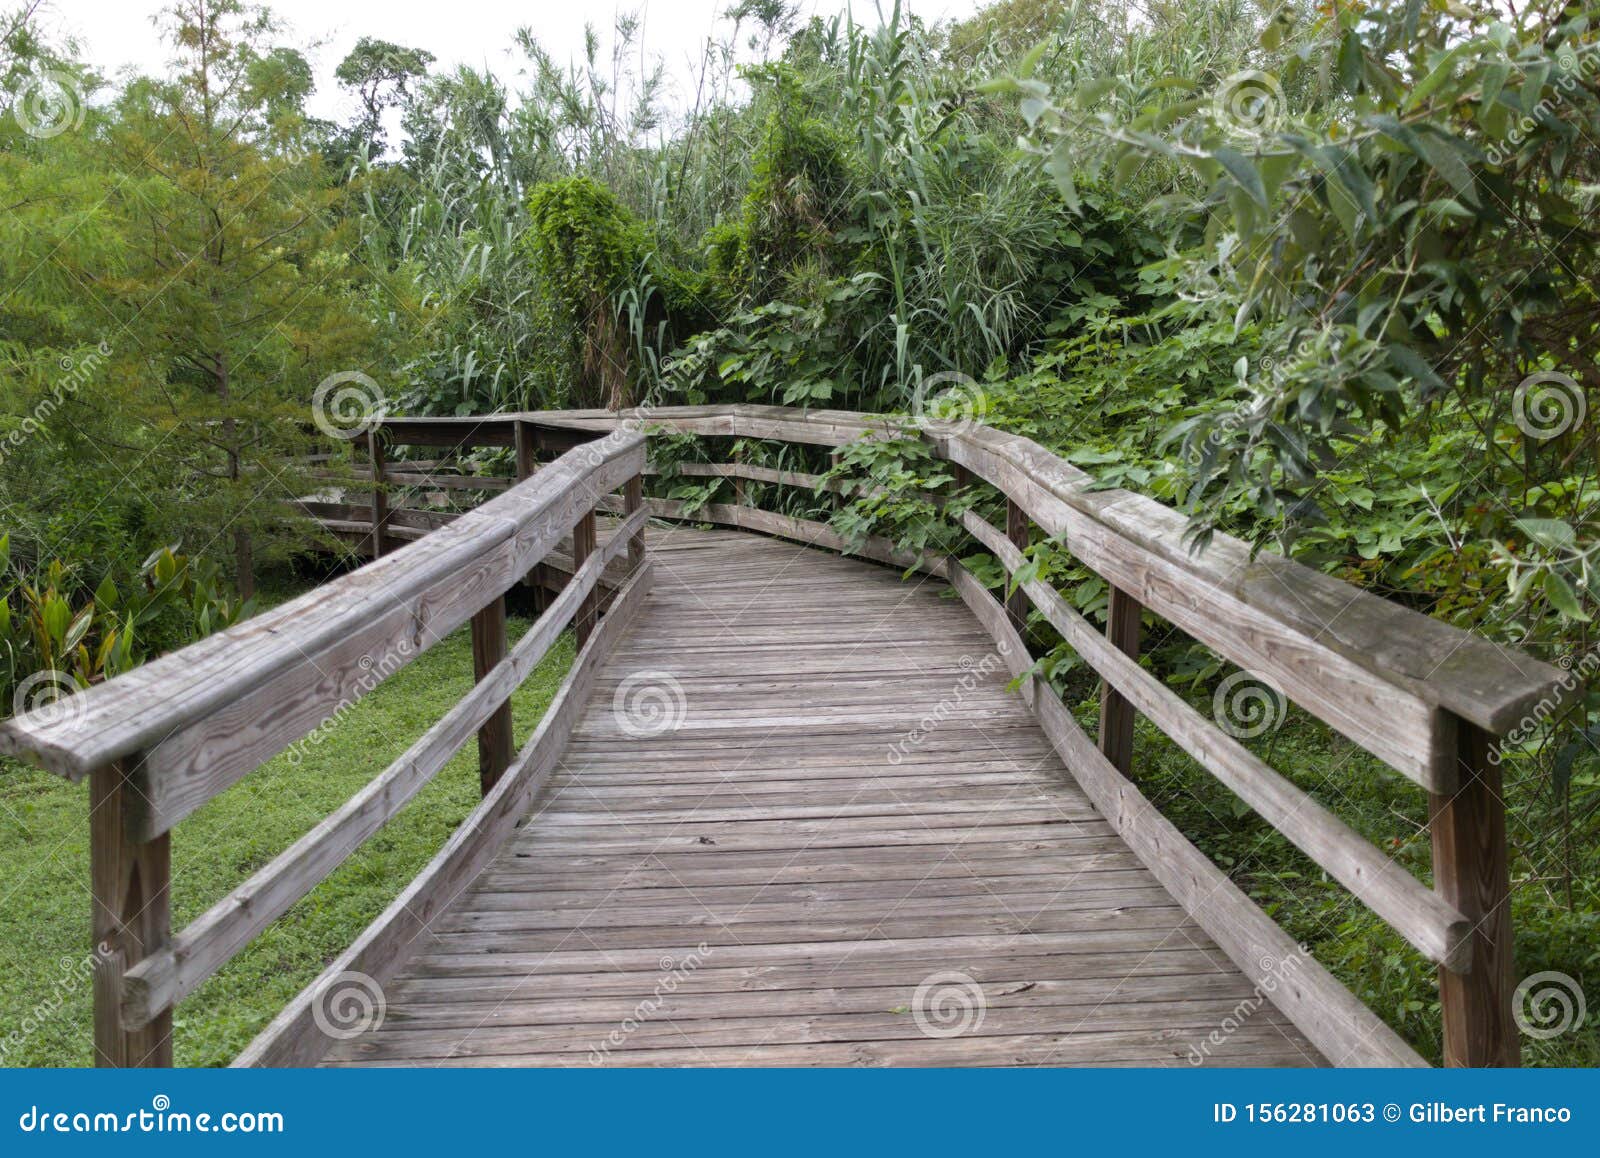 A Wooden Bridge In Mead Botanical Garden Stock Image Image Of